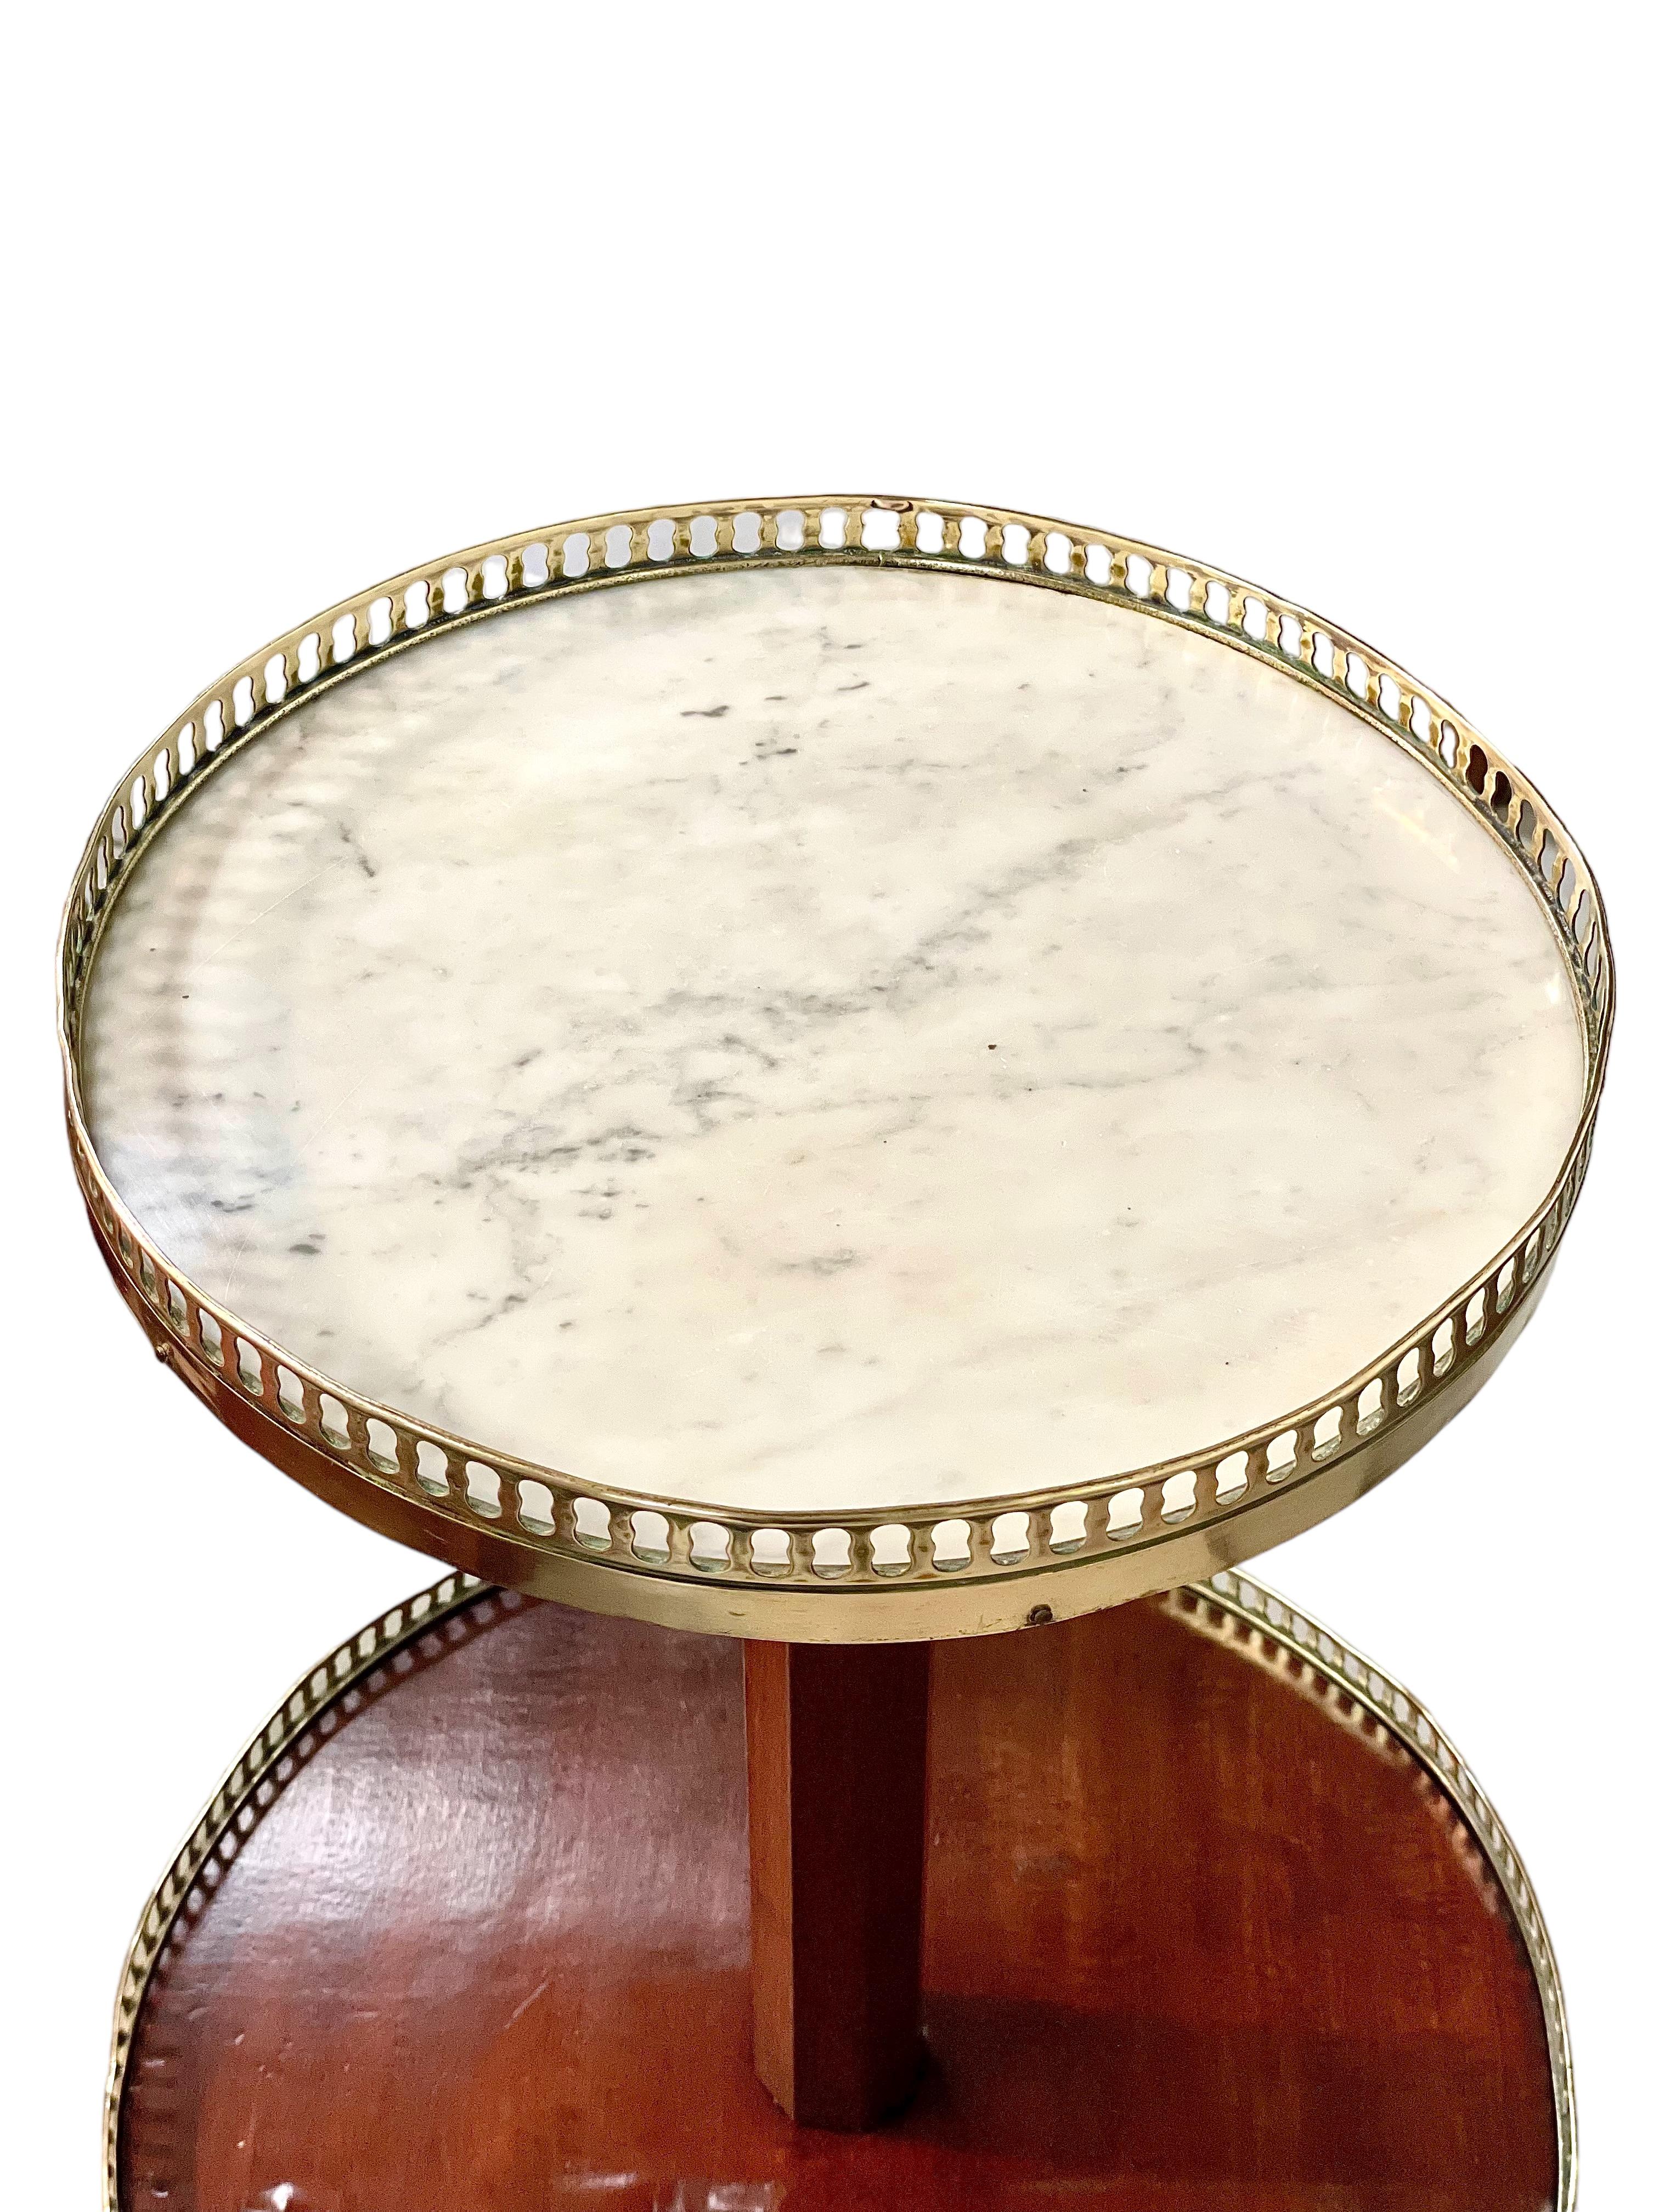 This superb antique two-tiered 'Dumb Waiter' serving table dates from the end of 19th century, and is beautifully constructed in mahogany veneer and marble. Crafted in the Louis XVI style, it features two graduated mahogany shelves, each enclosed by